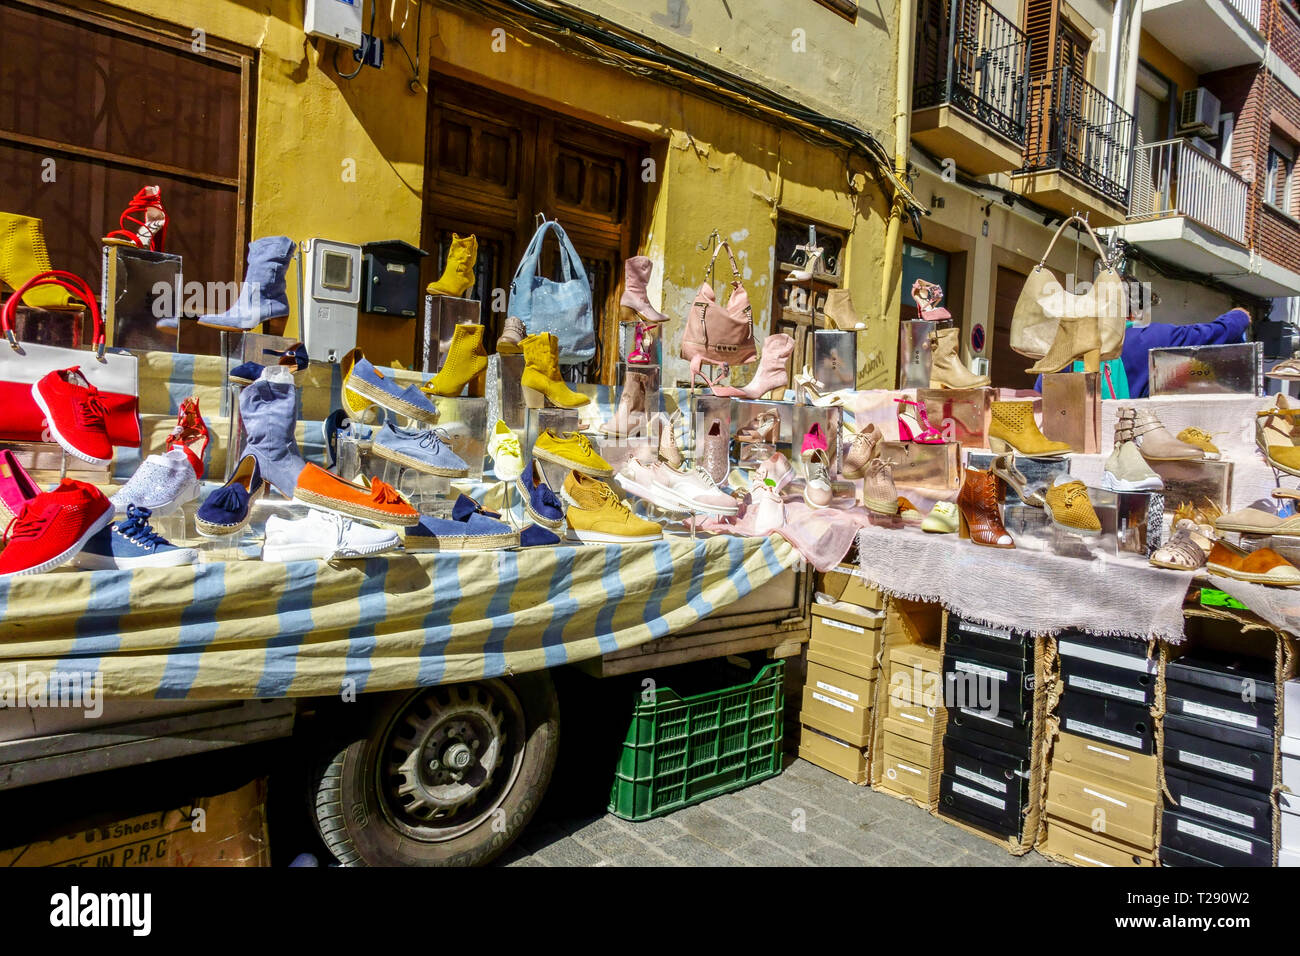 Every Thursday on the streets is a traditional market, Valencia street scene Cabanyal Canyamelar district  Spain, Shoe stall Valencia market outdoor Stock Photo